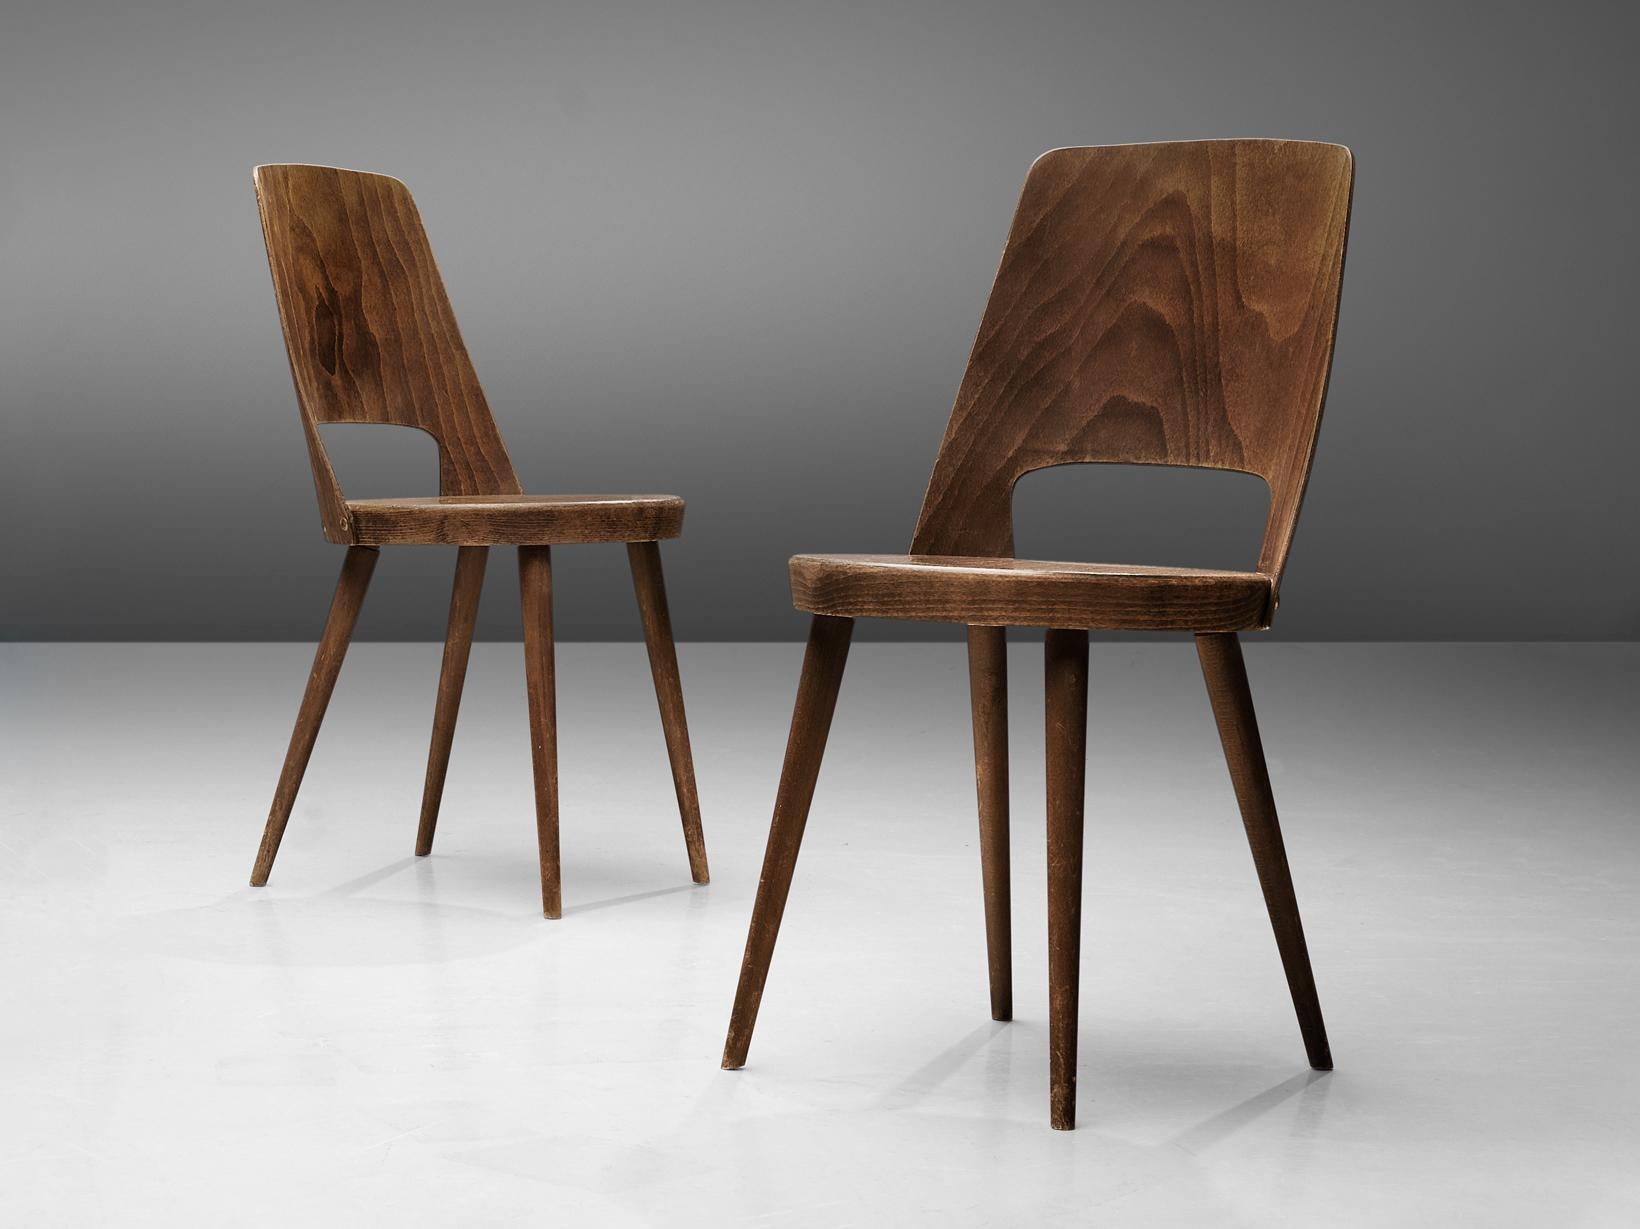 Jomaine Baumann, pair of 'Mondor' dining chairs, plywood, wood, France, 1960s

The ‘Mondor’ dining chair was manufactured by French furniture maker Jomaine Baumann. Characteristic for the ‘Mondor’ chair is the curved bentwood back with a